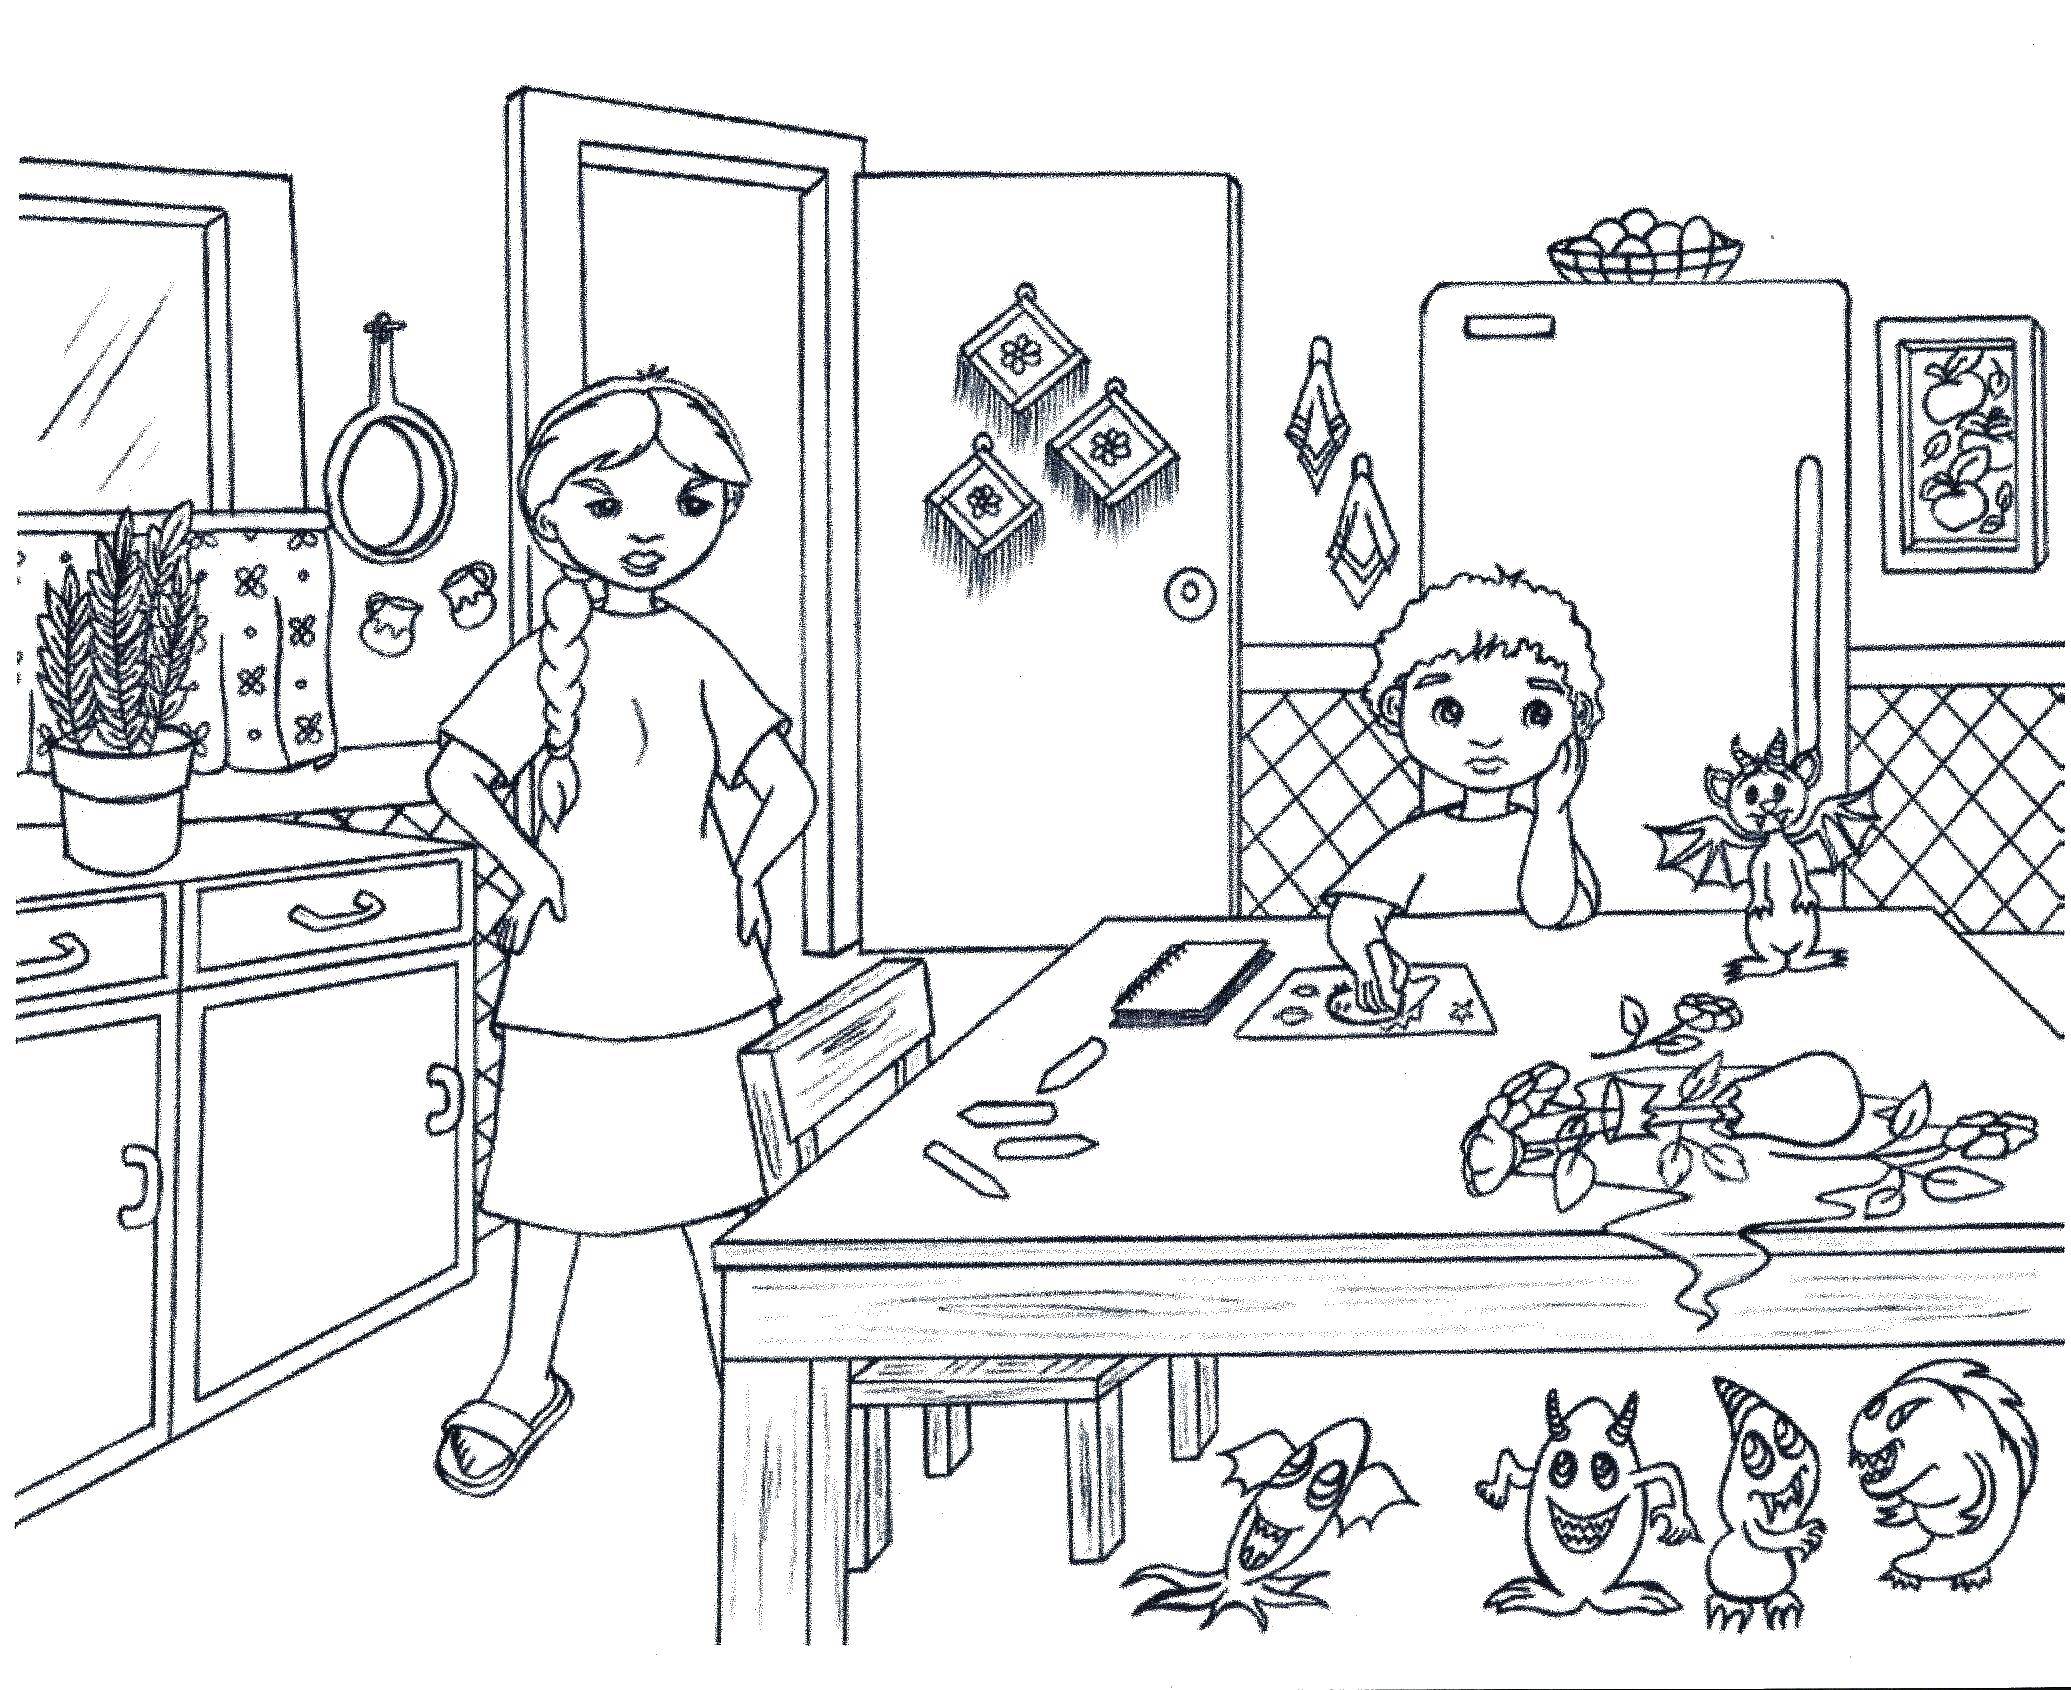 Coloring Mom and son in the kitchen. Category Kitchen. Tags:  kitchen, mother, son.